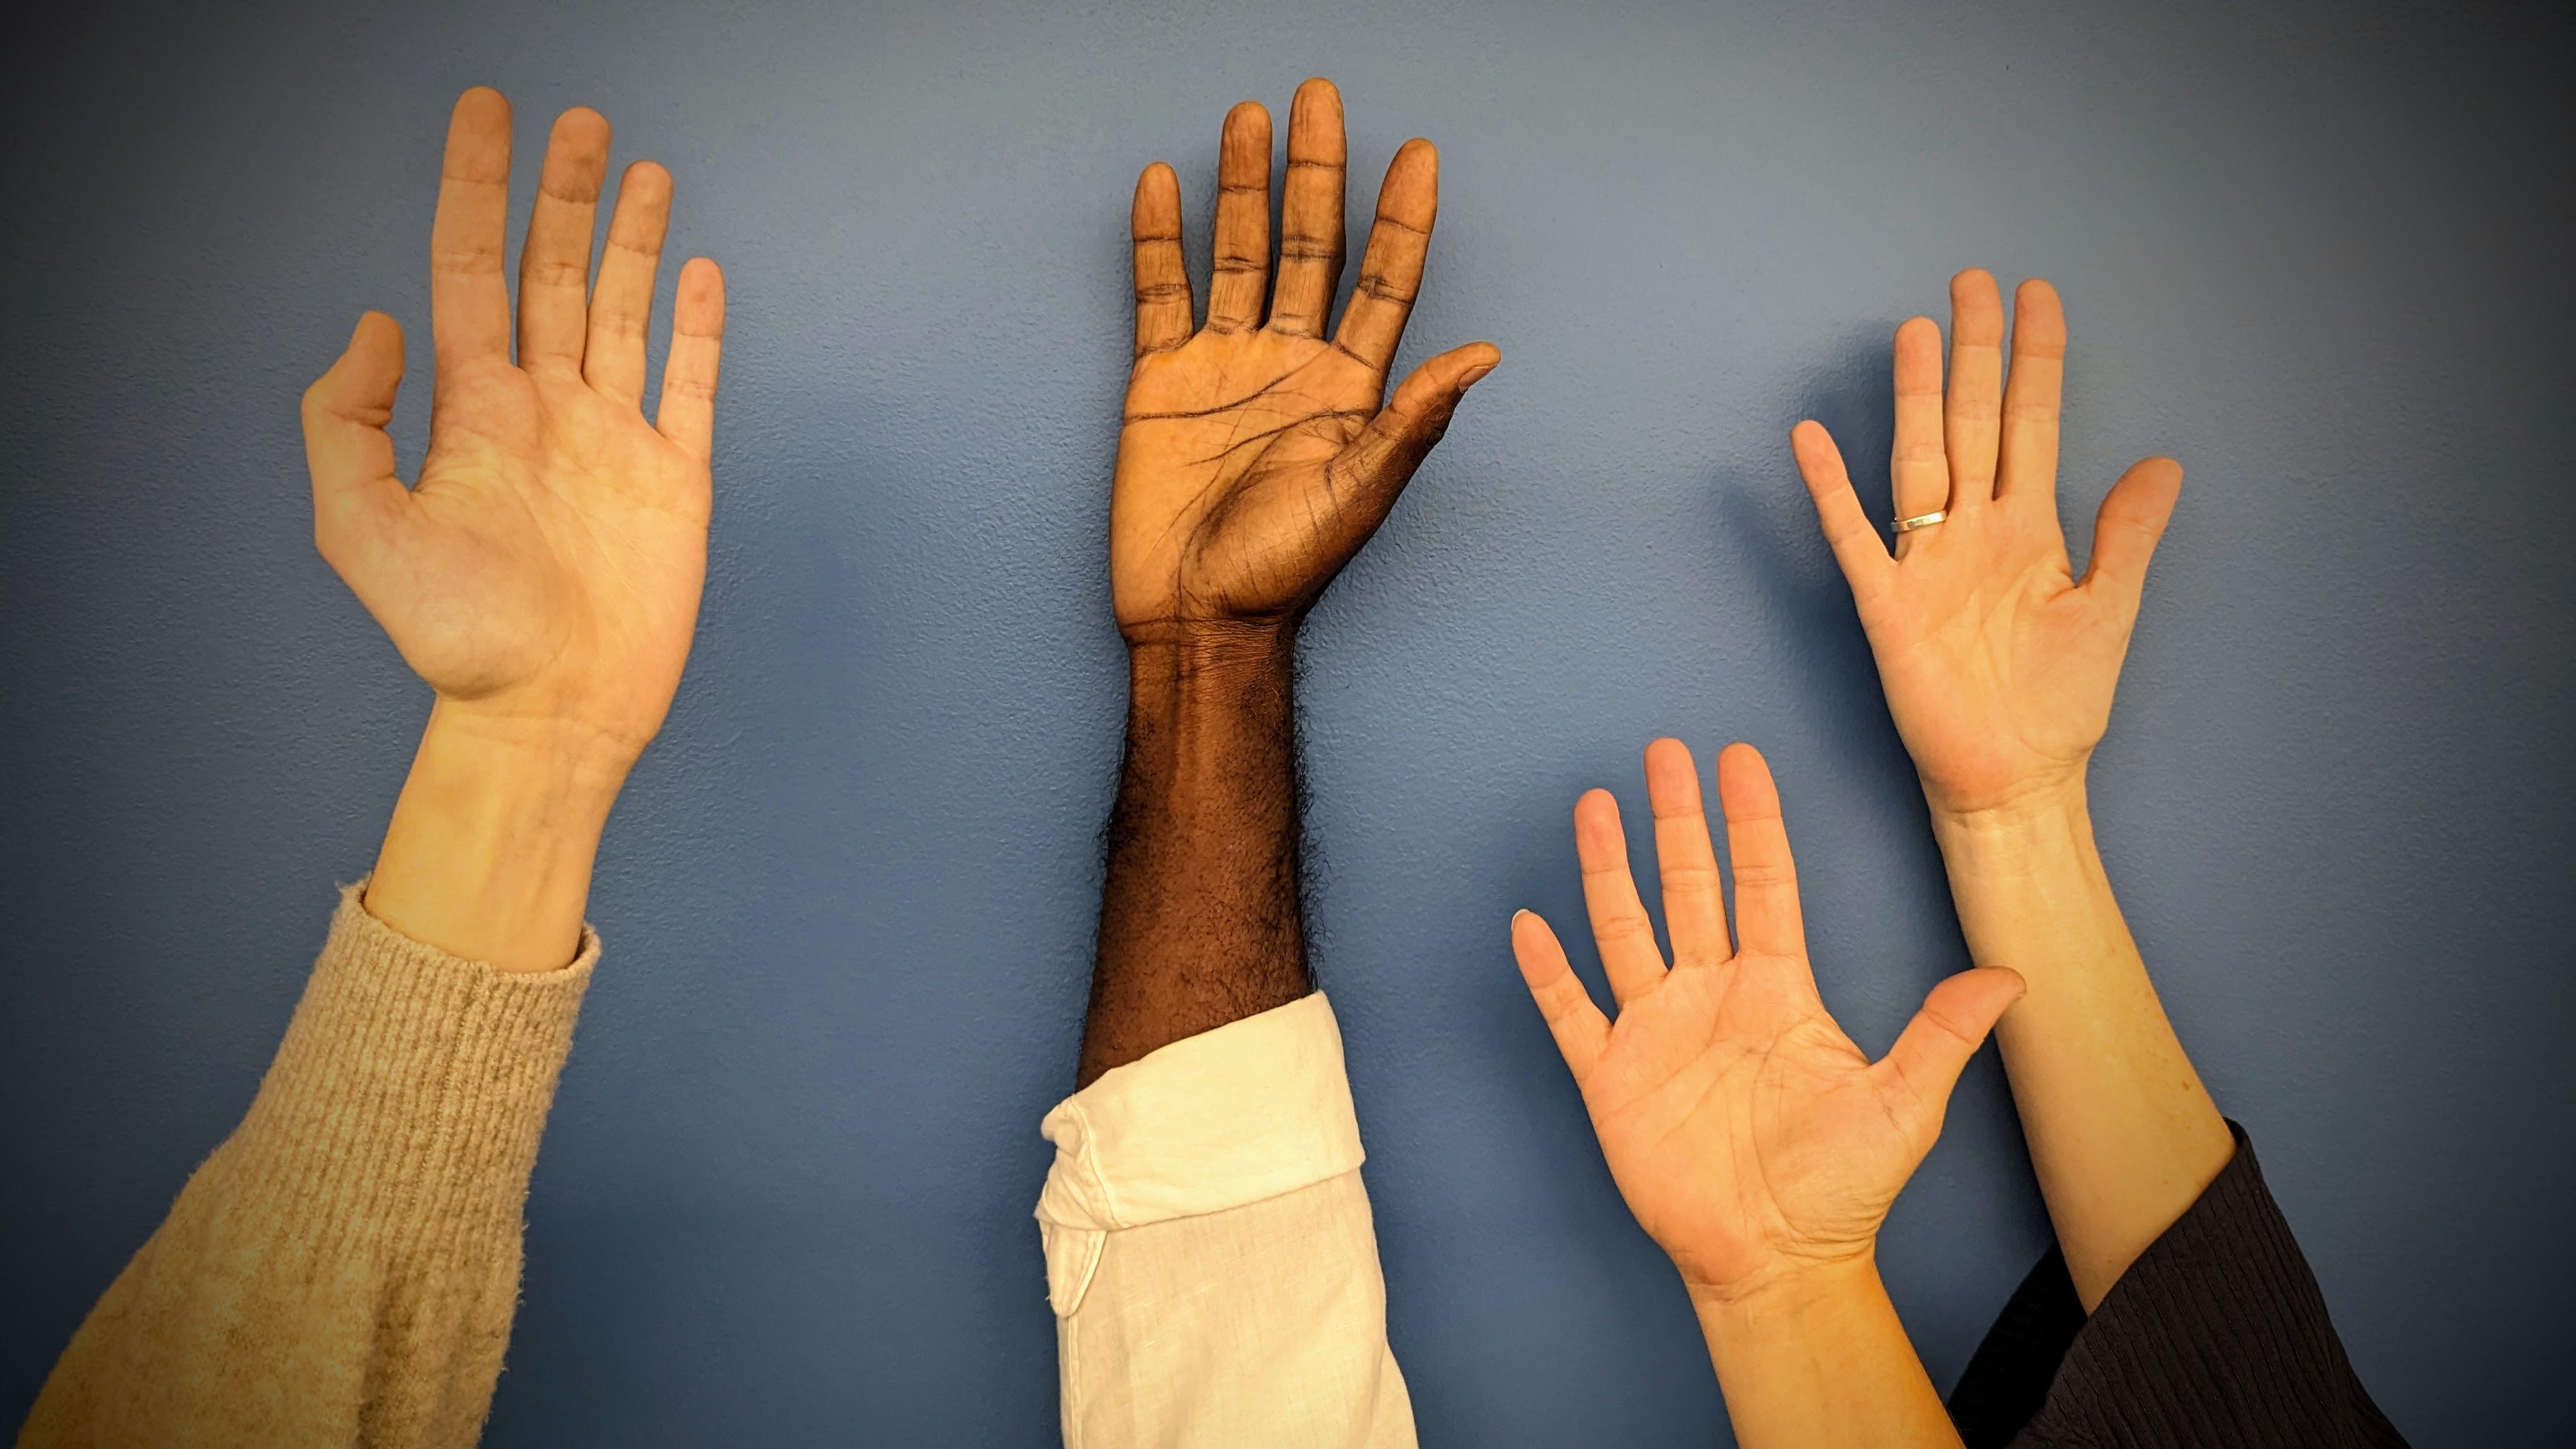 A photograph of four raised hands.